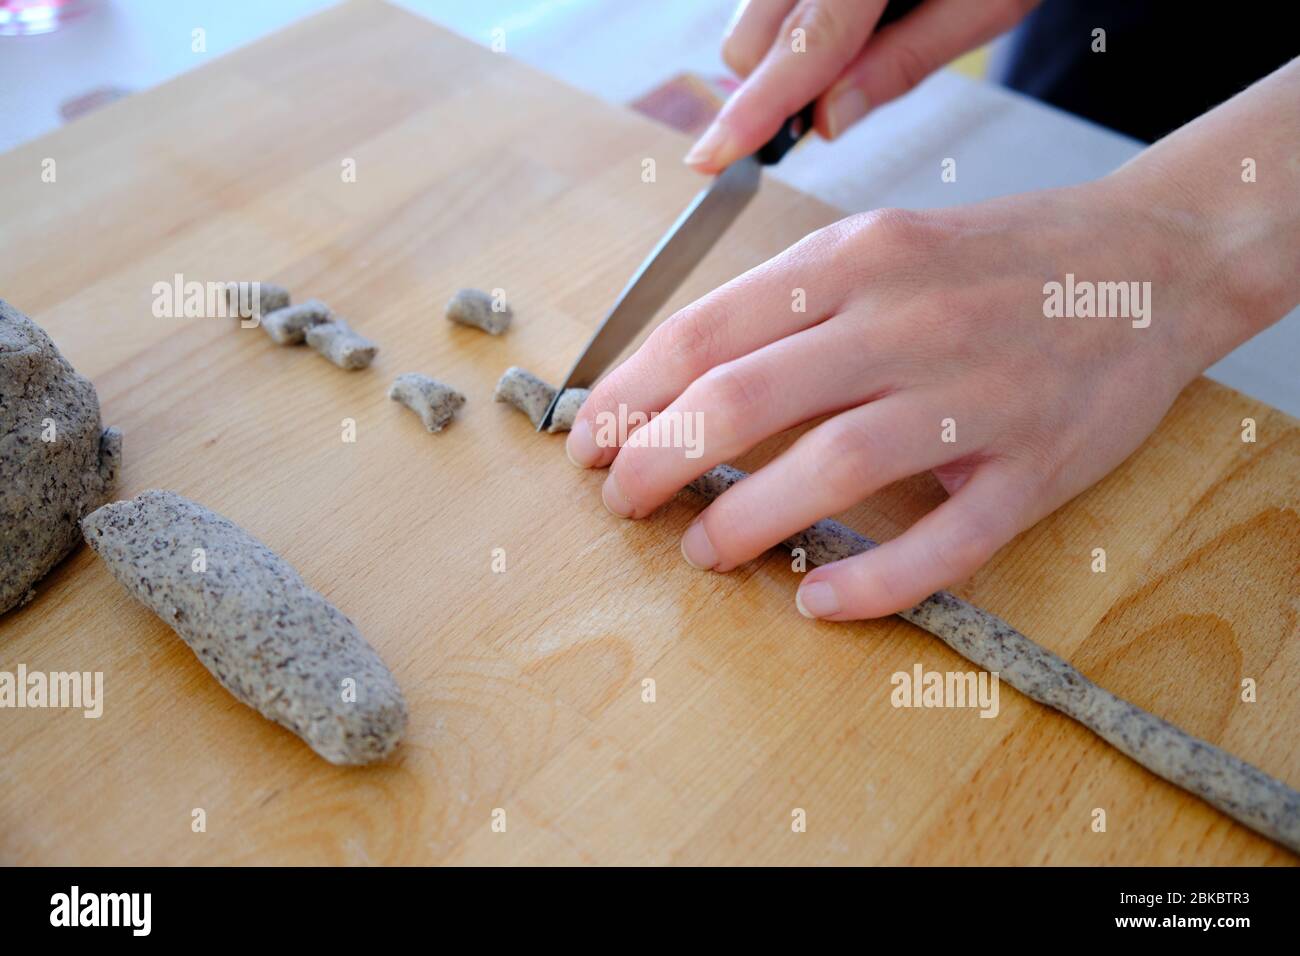 Homemade preparation of Italian gnocchi made with buckwheat flour. It is a gluten-free dish suitable for people with celiac disease. Stock Photo